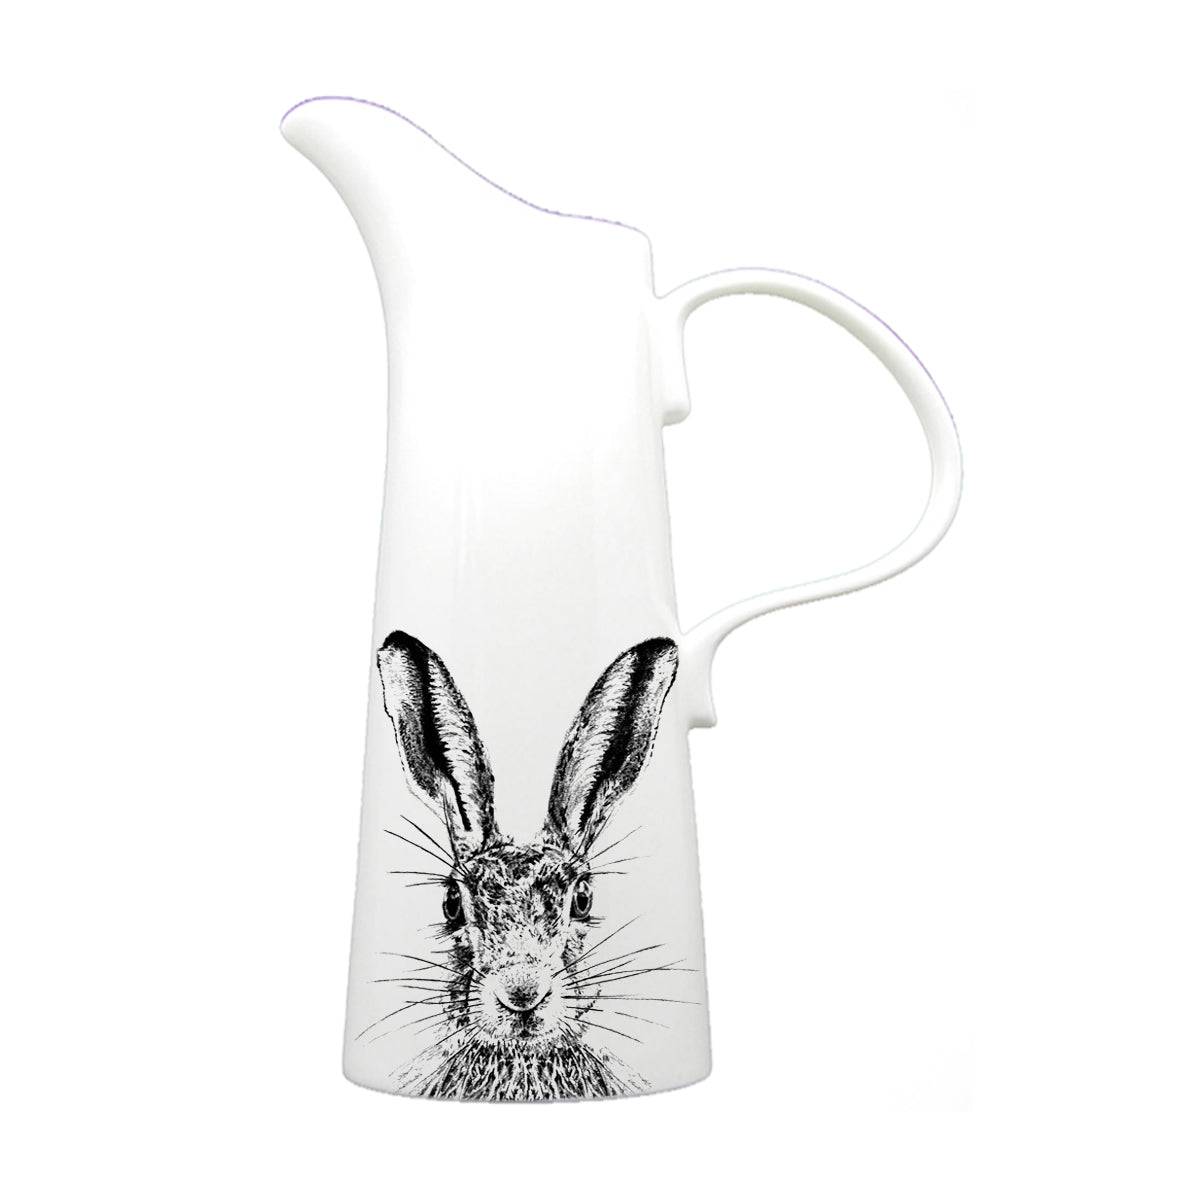 Sassy Hare Jug - Extra Large for sale - Woodcock and Cavendish